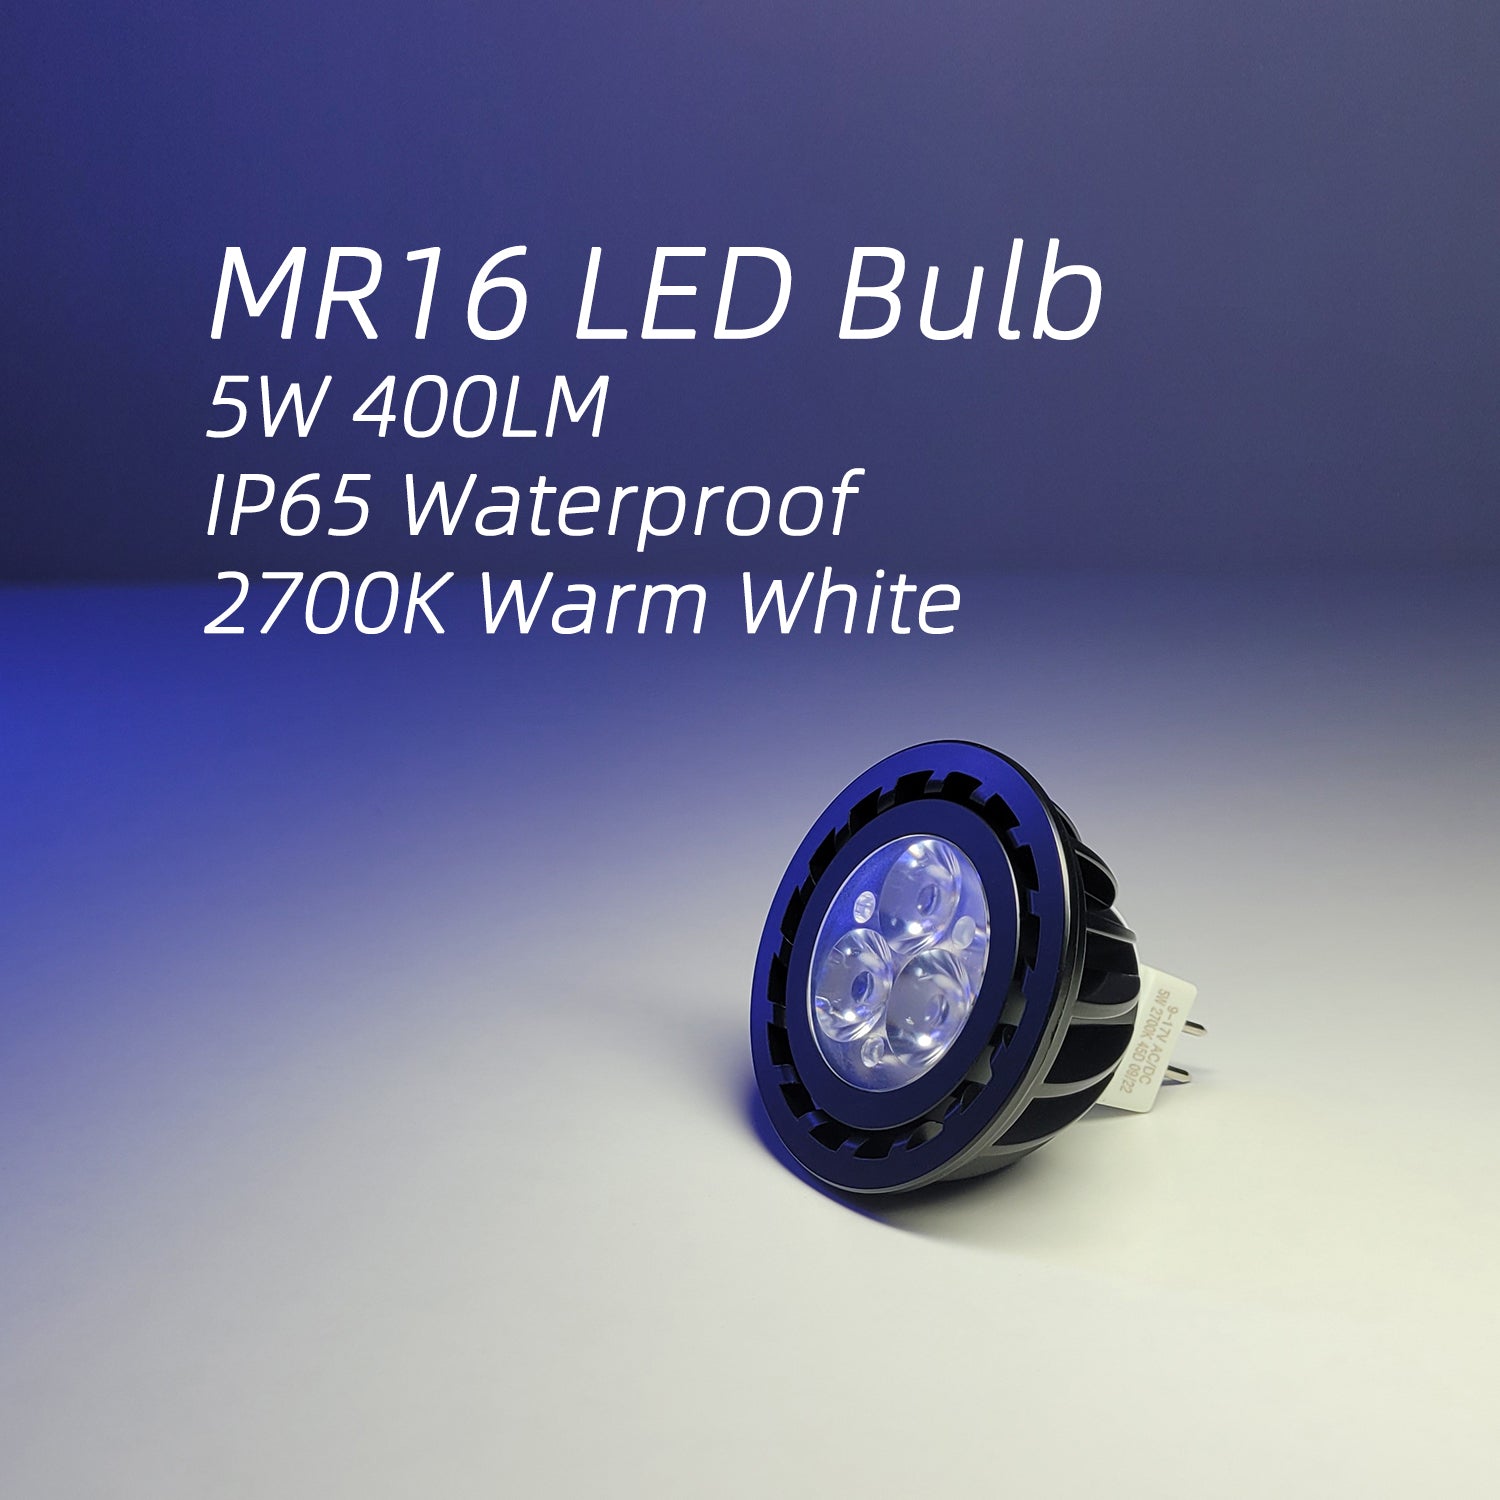 MR16 LED bulb, 5W 400 lumens, IP65 waterproof rating, emitting 2700K warm white light for outdoor landscaping.